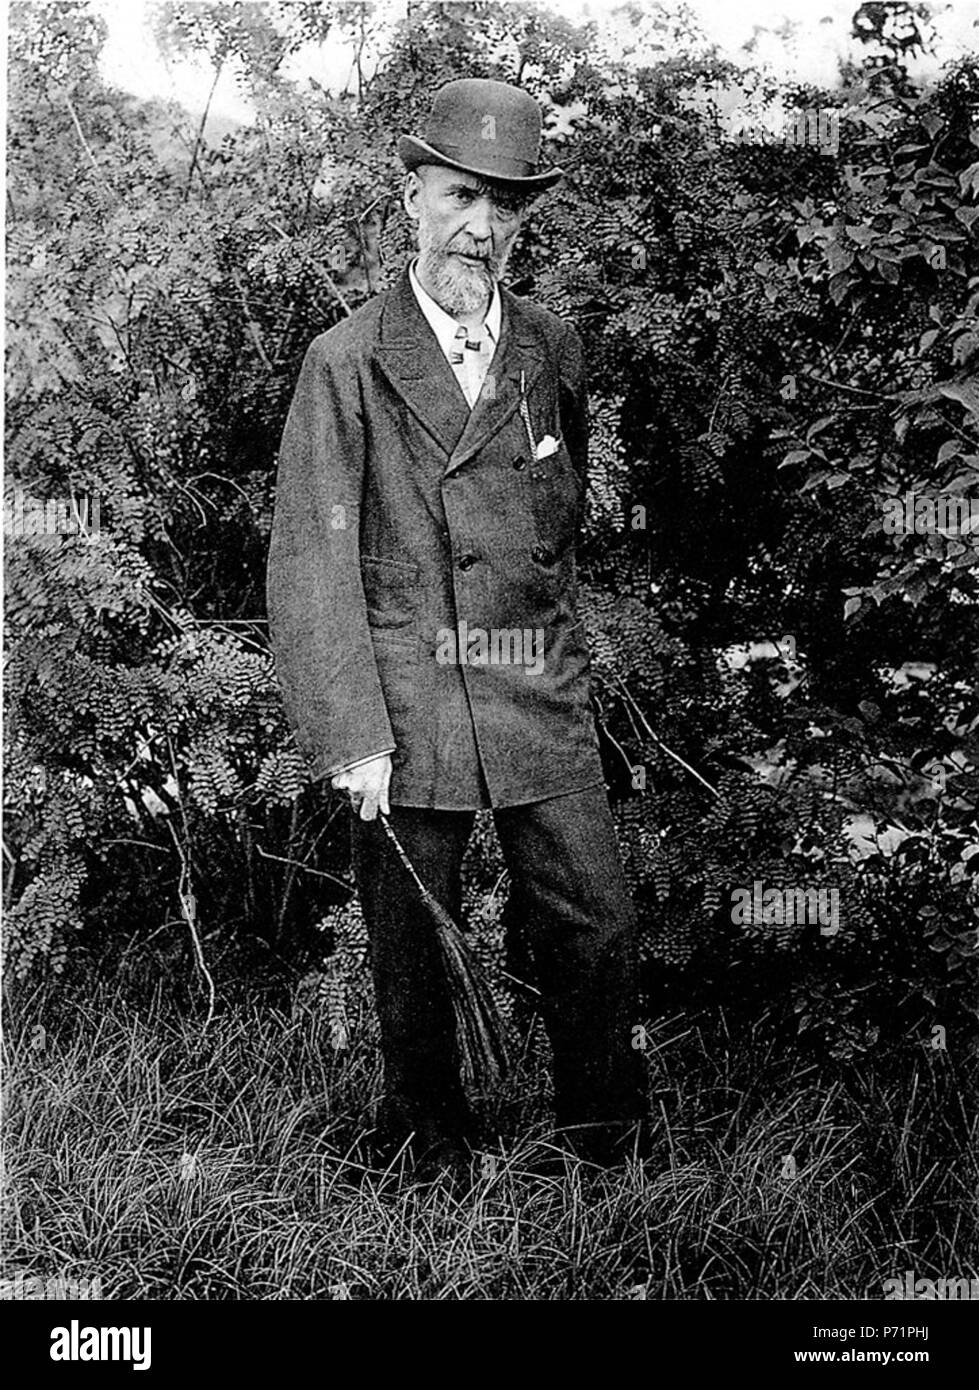 Deutsch: Sir Robert Hart, 1st Baronet — photo from Ein Tagebuch in Bildern English: Sir Robert Hart, 1st Baronet — British consular official in China, who served as the second Inspector-General of China's Imperial Maritime Custom Service (IMCS) from 1863 to 1911. 28 June 1902 [1] 212 Sir Robert Hart Stock Photo